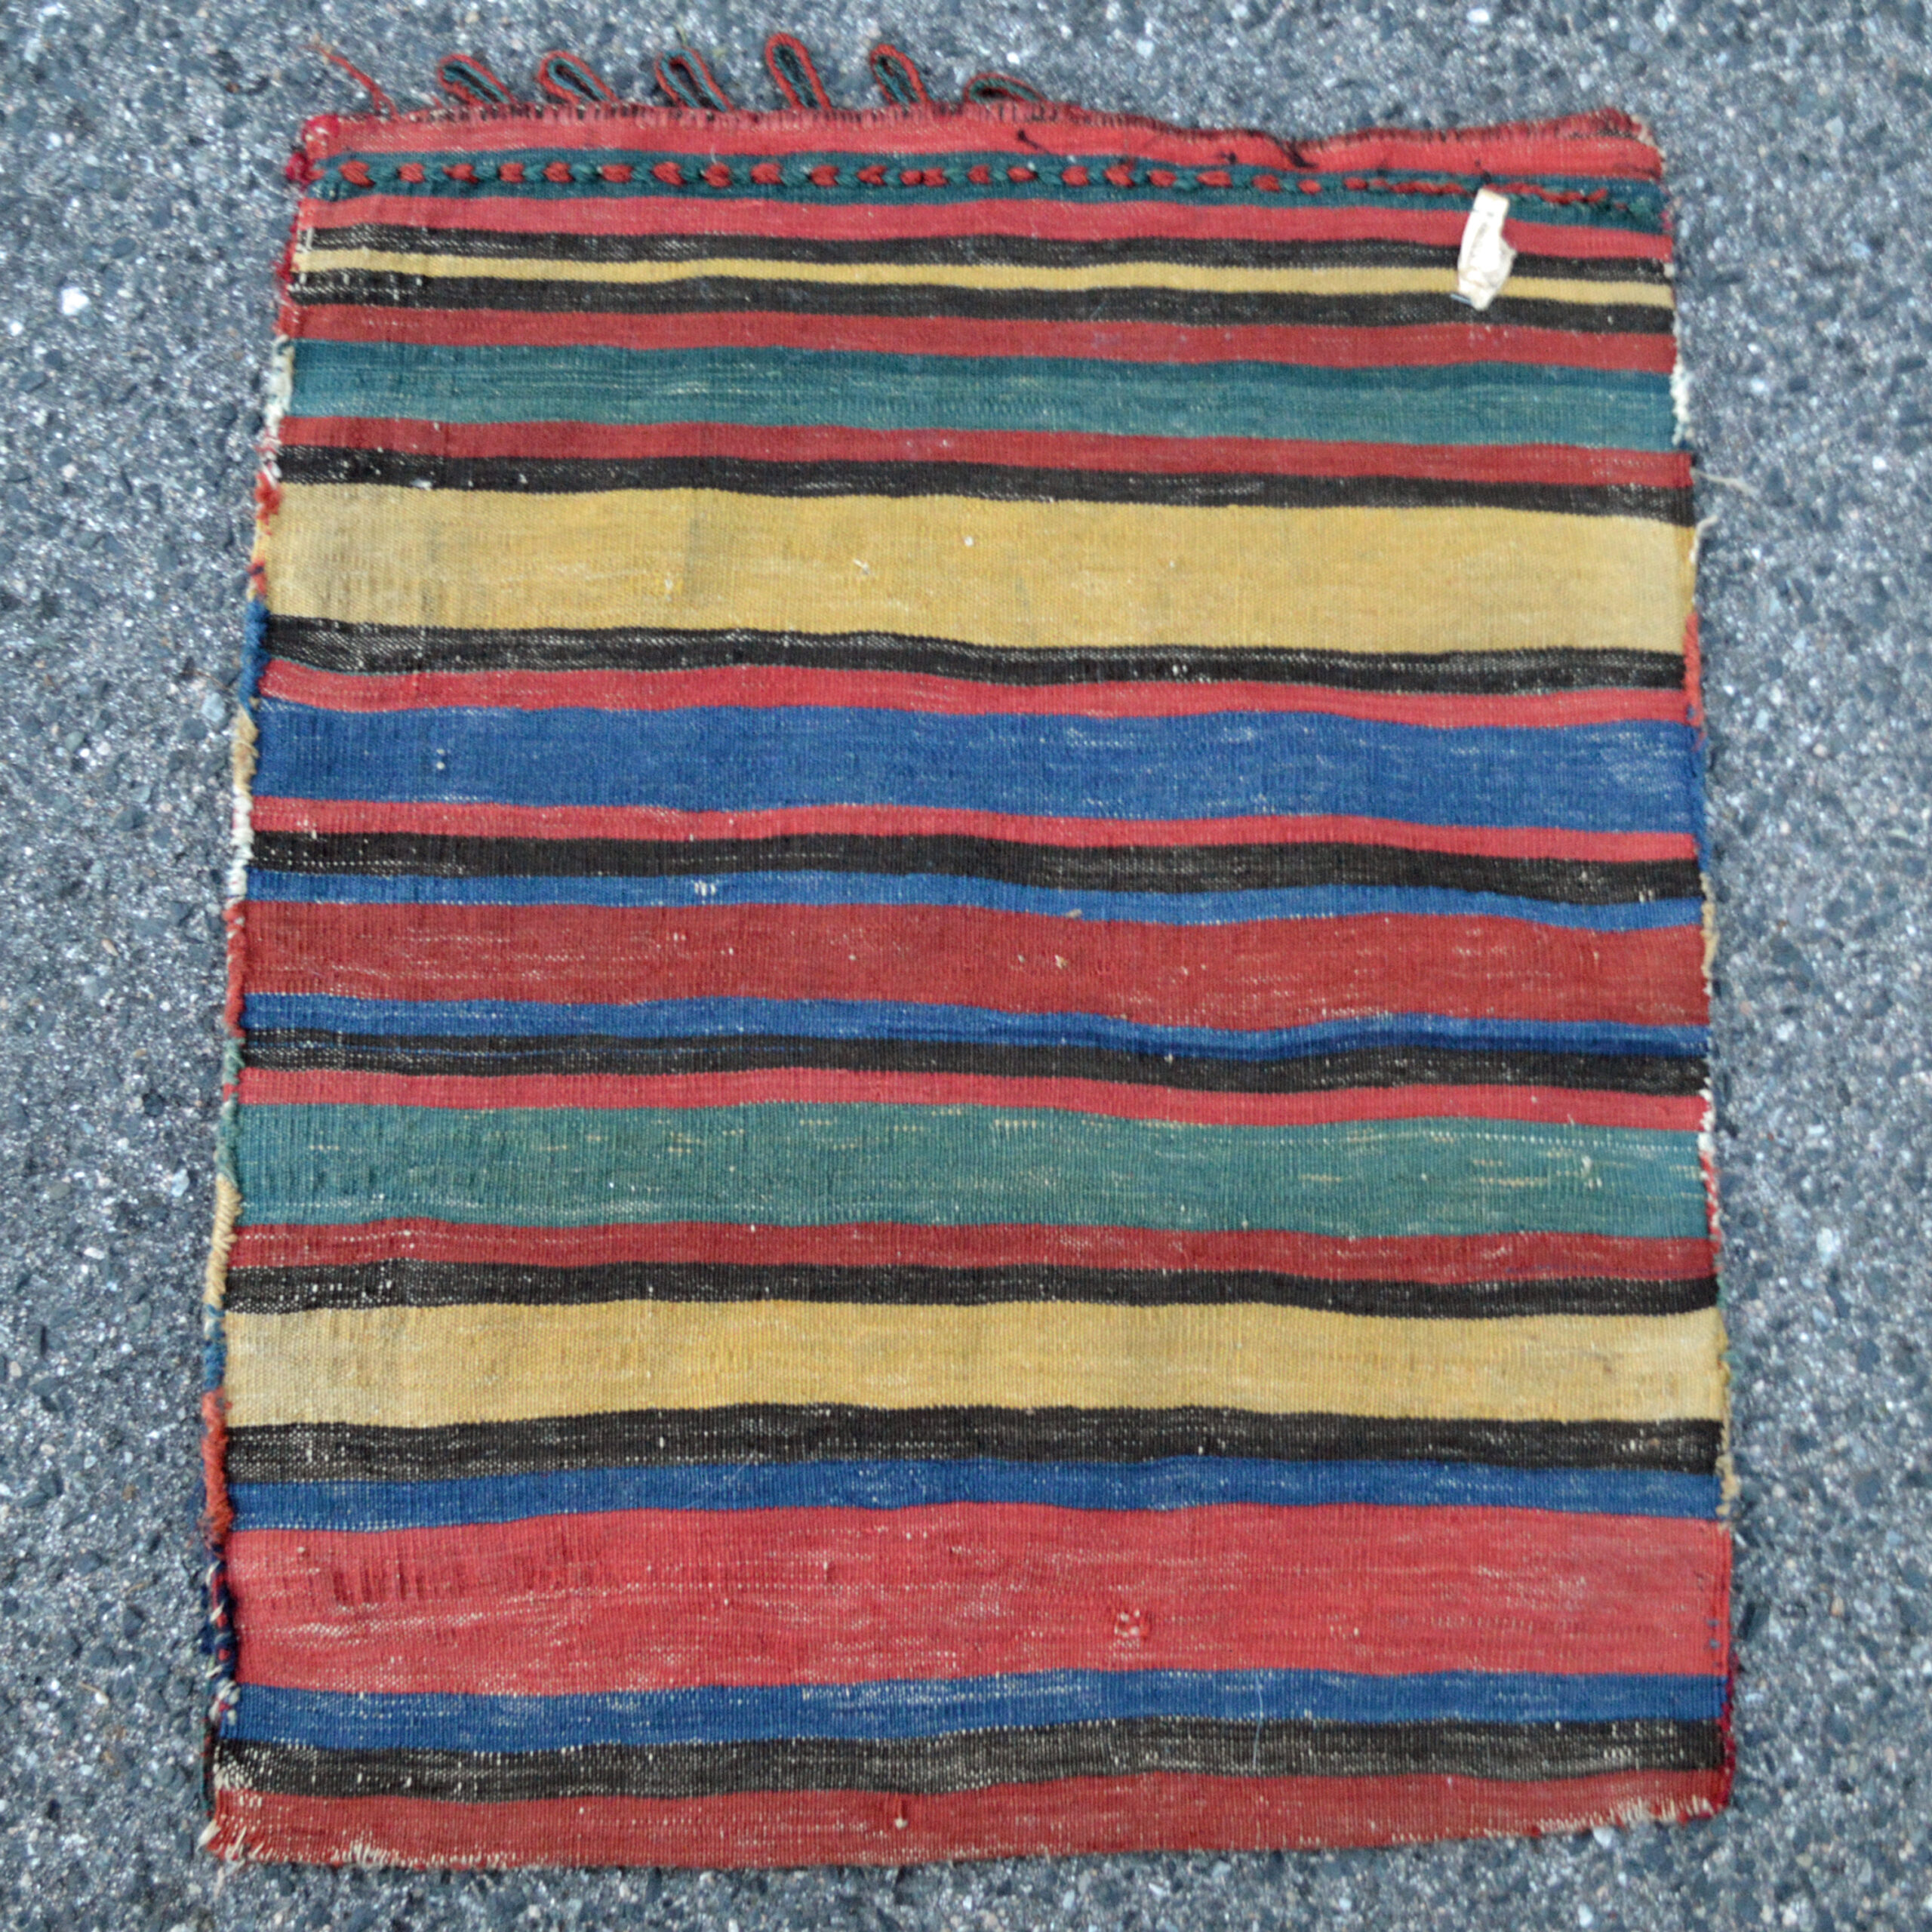 Vertically striped kilim back from an antique Caucasian bag, Douglas Stock Gallery, antique bags, antique bag faces, antique tribal rugs